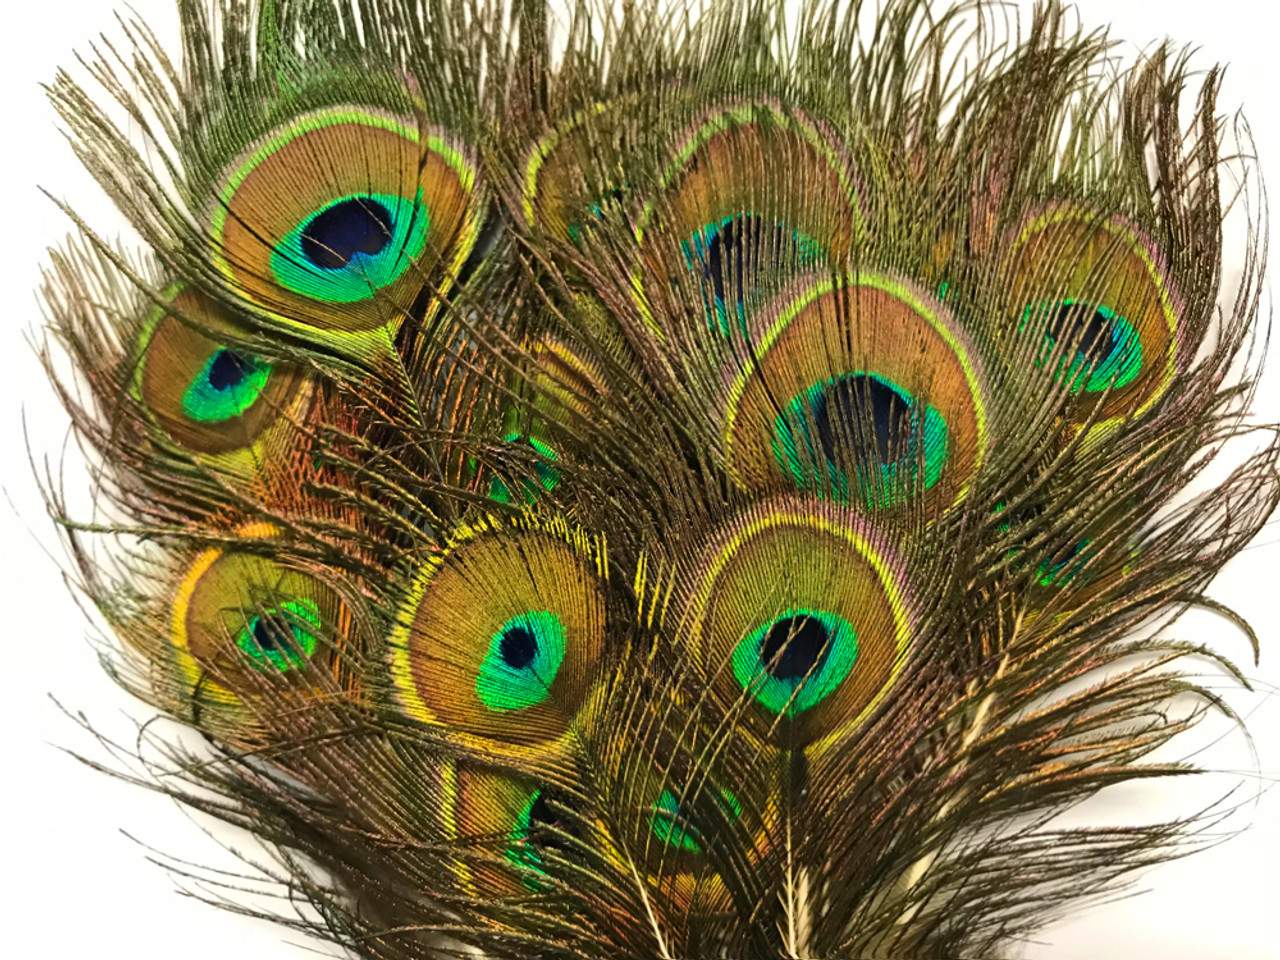 10 Pieces - Mini Natural Peacock Tail Body Feathers 3-6 Long